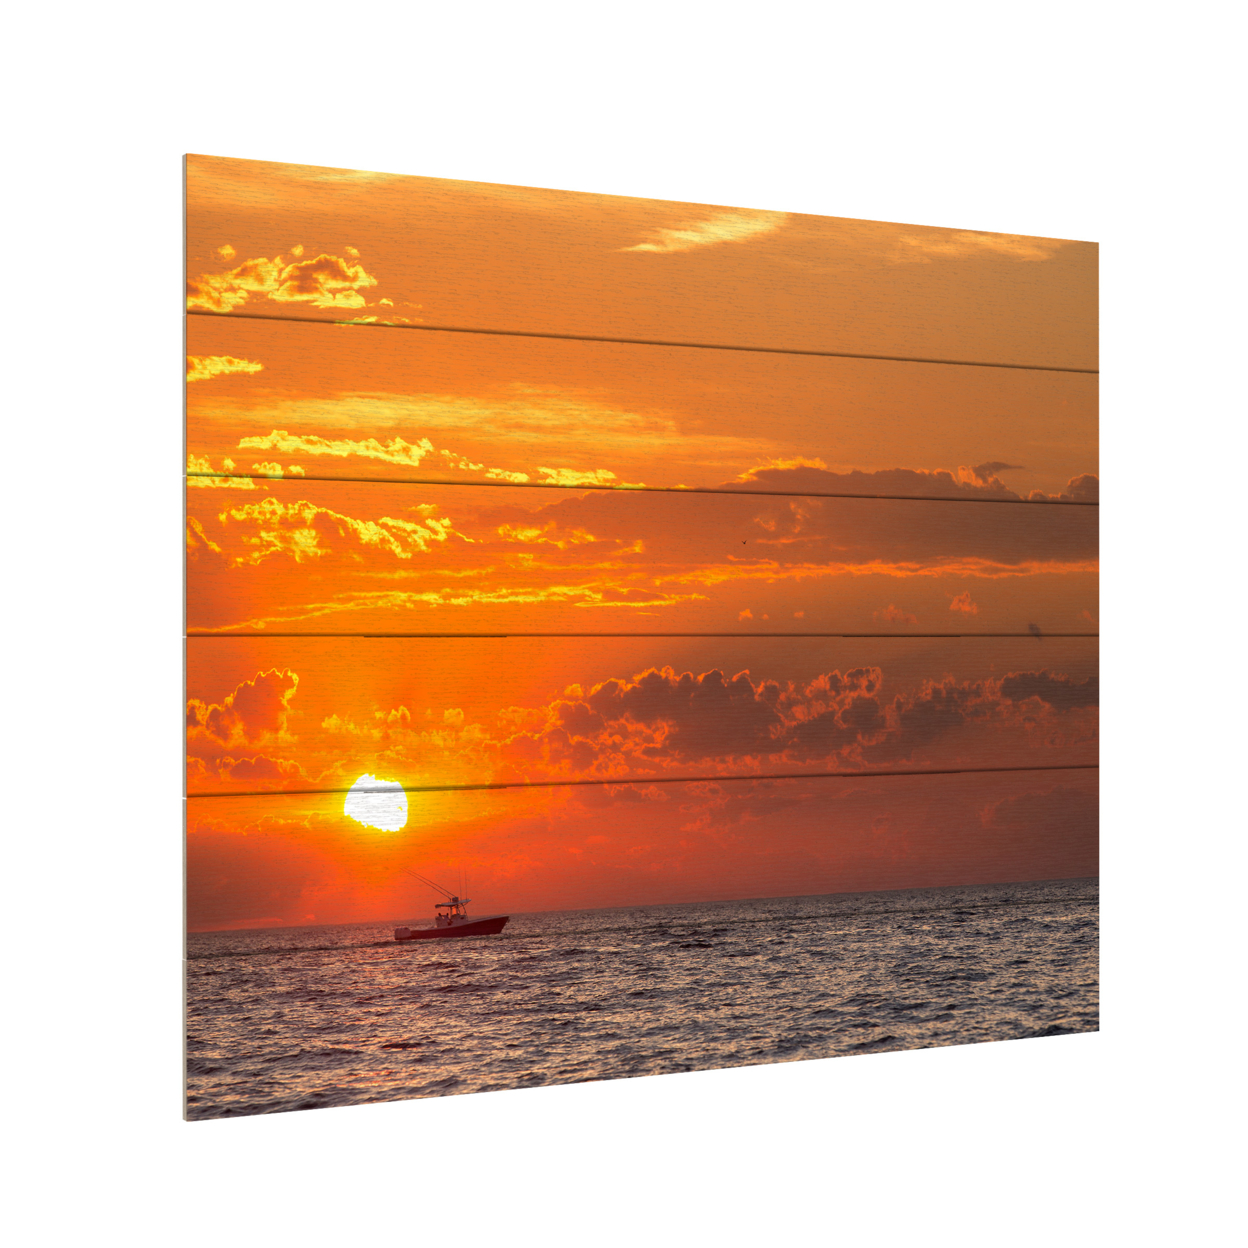 Wooden Slat Art 18 X 22 Inches Titled Fishing Boat Sunset Ready To Hang Home Decor Picture